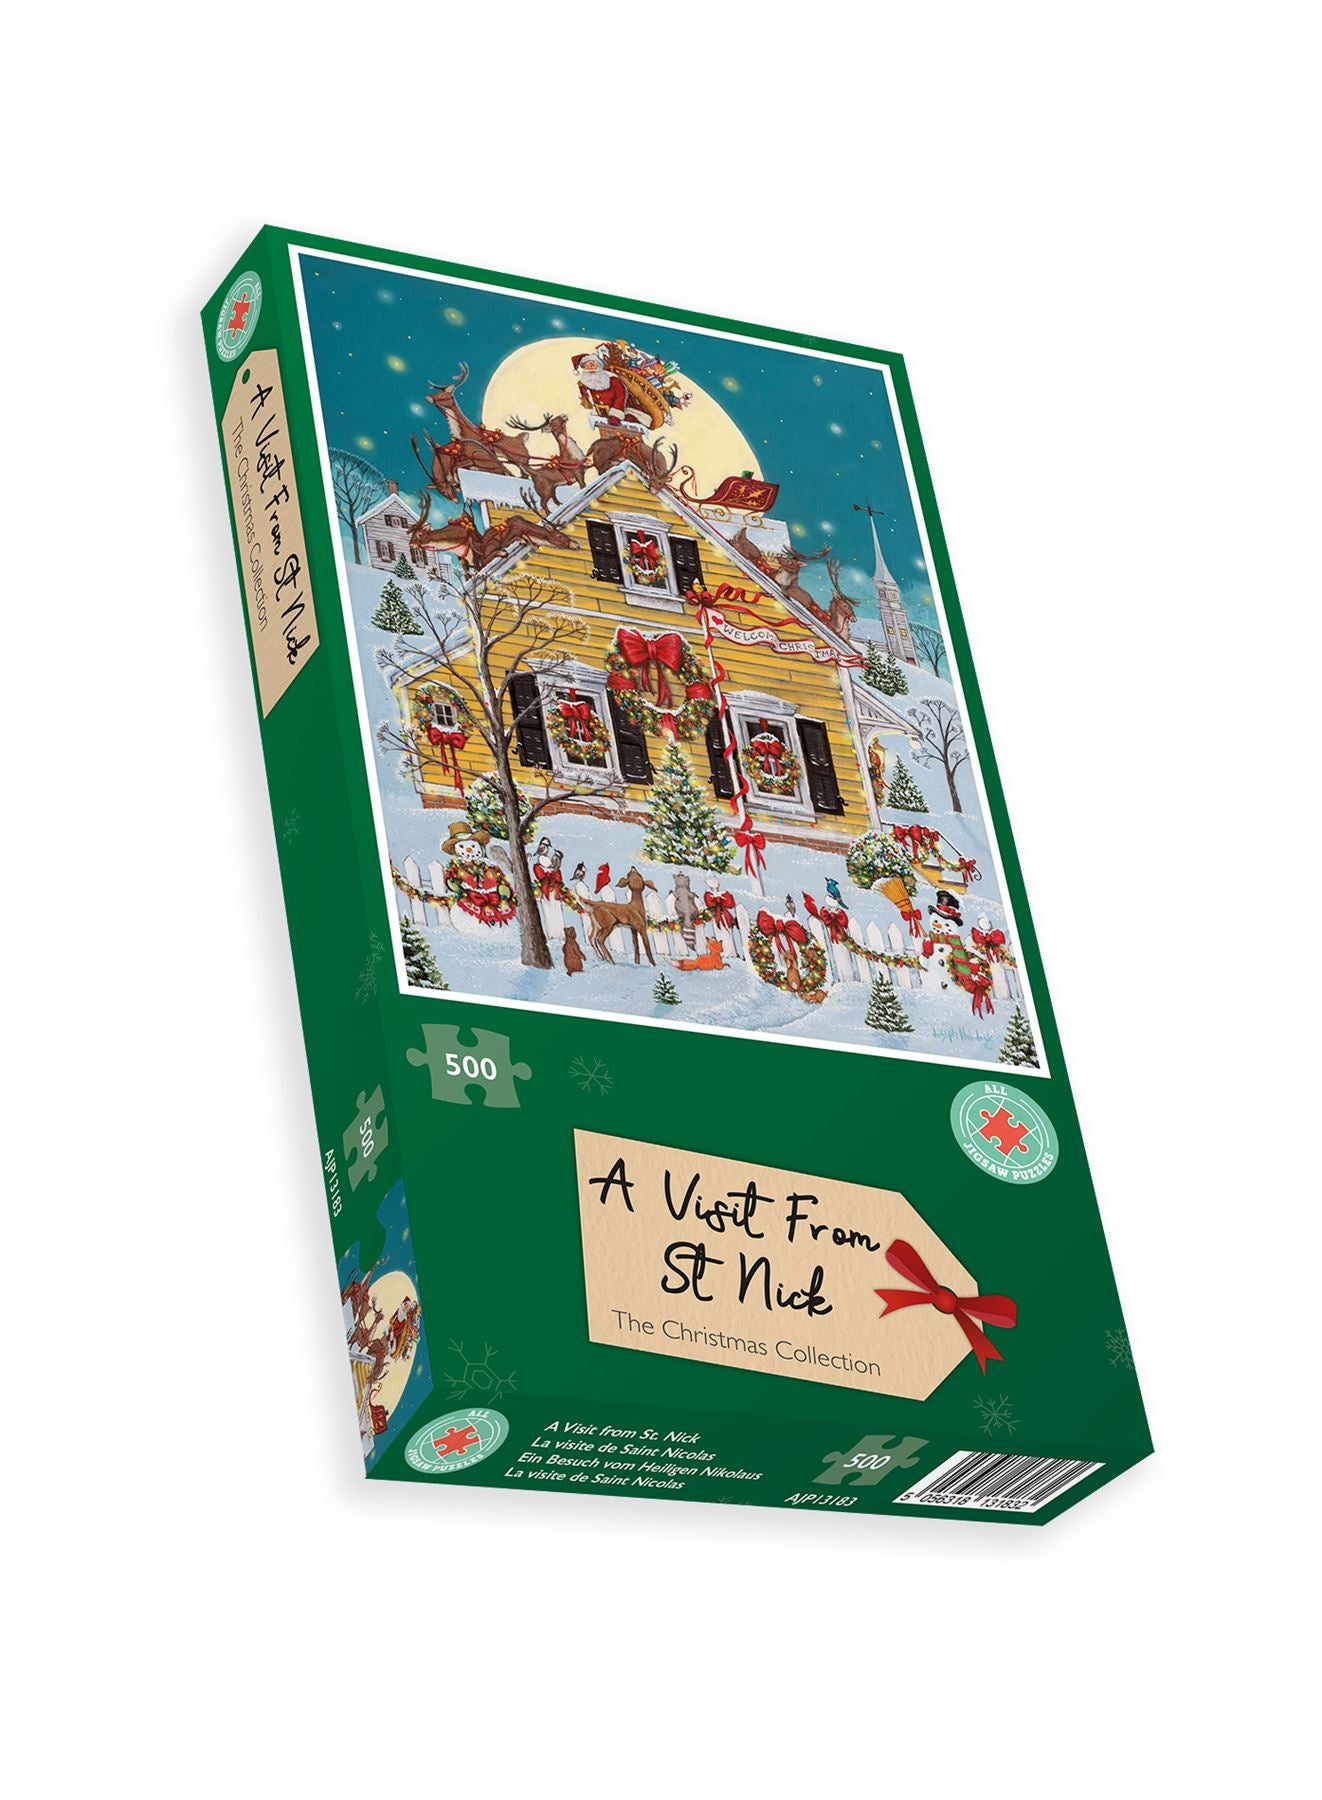 A Visit from St Nick 500 Piece Jigsaw Puzzle